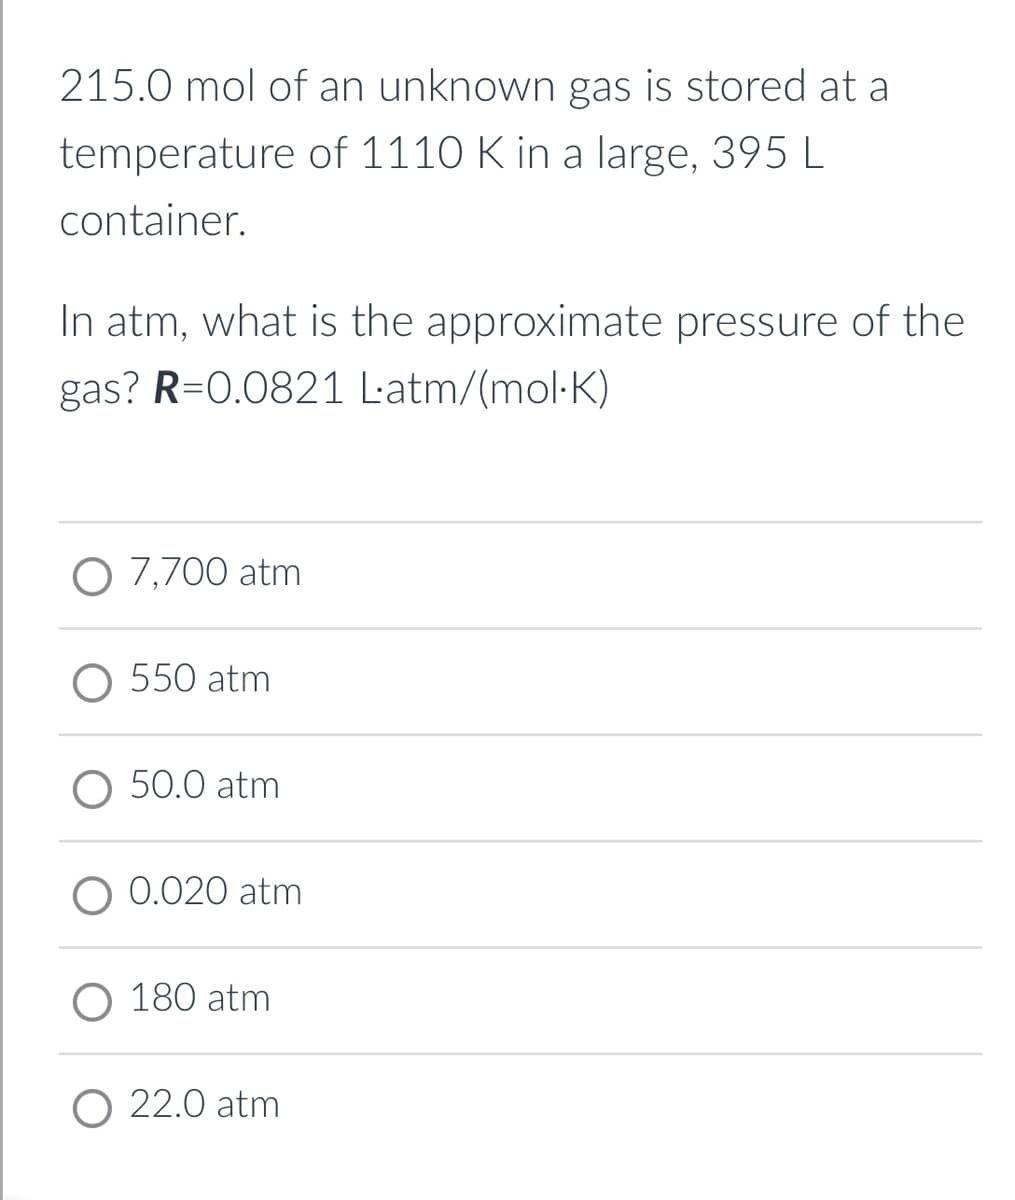 215.0 mol of an unknown gas is stored at a
temperature of 1110 K in a large, 395 L
container.
In atm, what is the approximate pressure of the
gas? R=0.0821 Latm/(mol-K)
O 7,700 atm
O 550 atm
O 50.0 atm
O 0.020 atm
O 180 atm
O 22.0 atm
